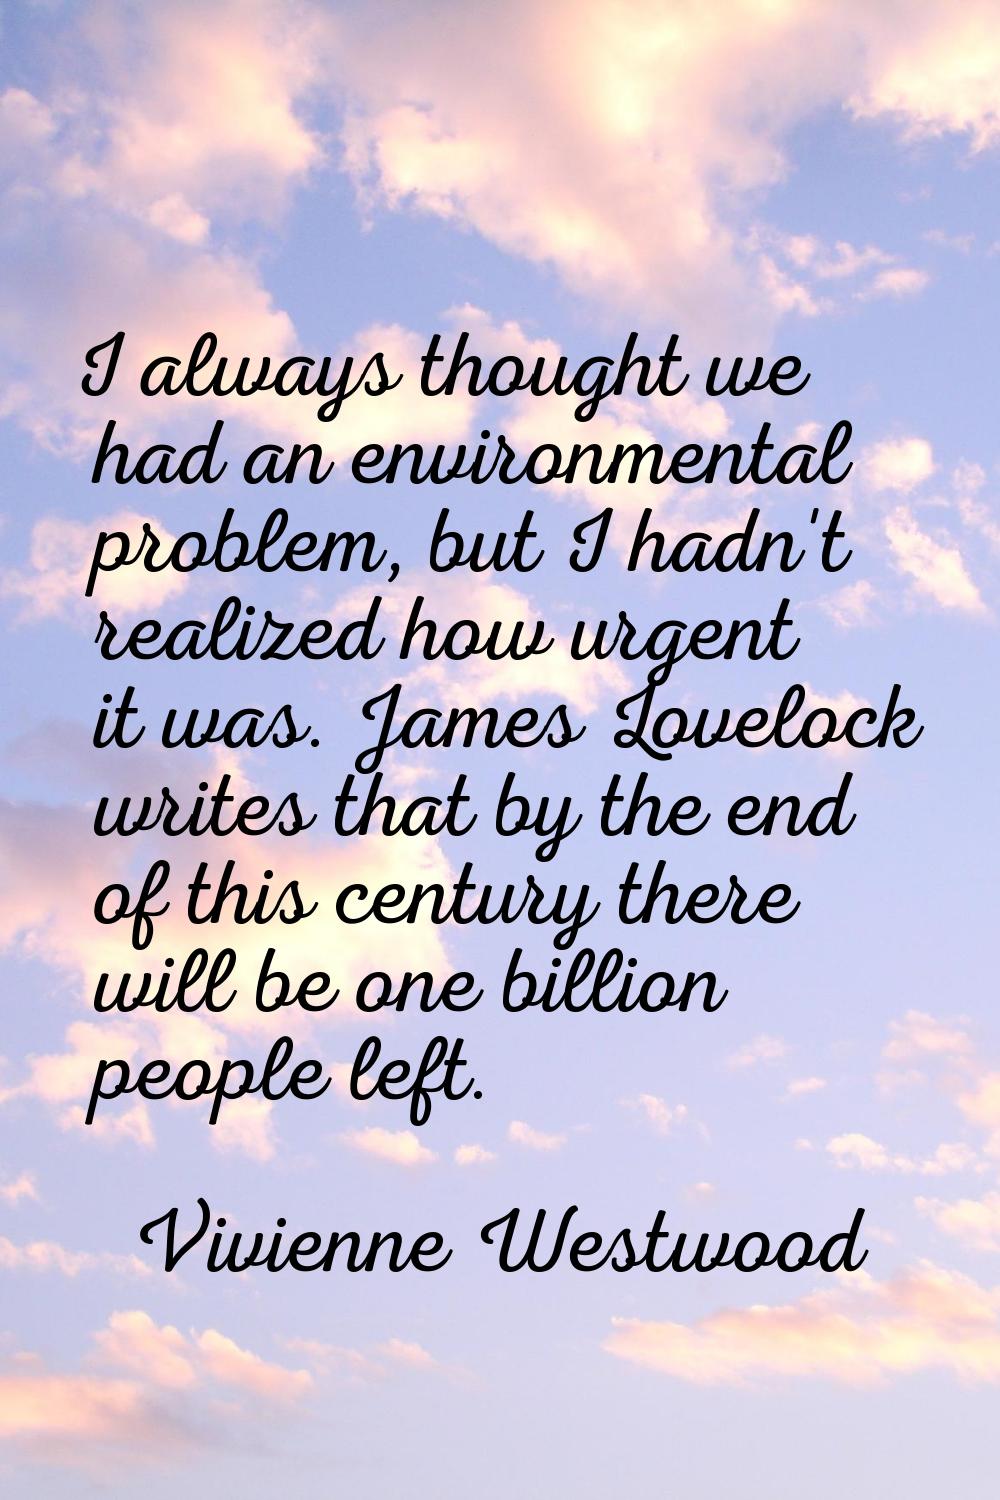 I always thought we had an environmental problem, but I hadn't realized how urgent it was. James Lo